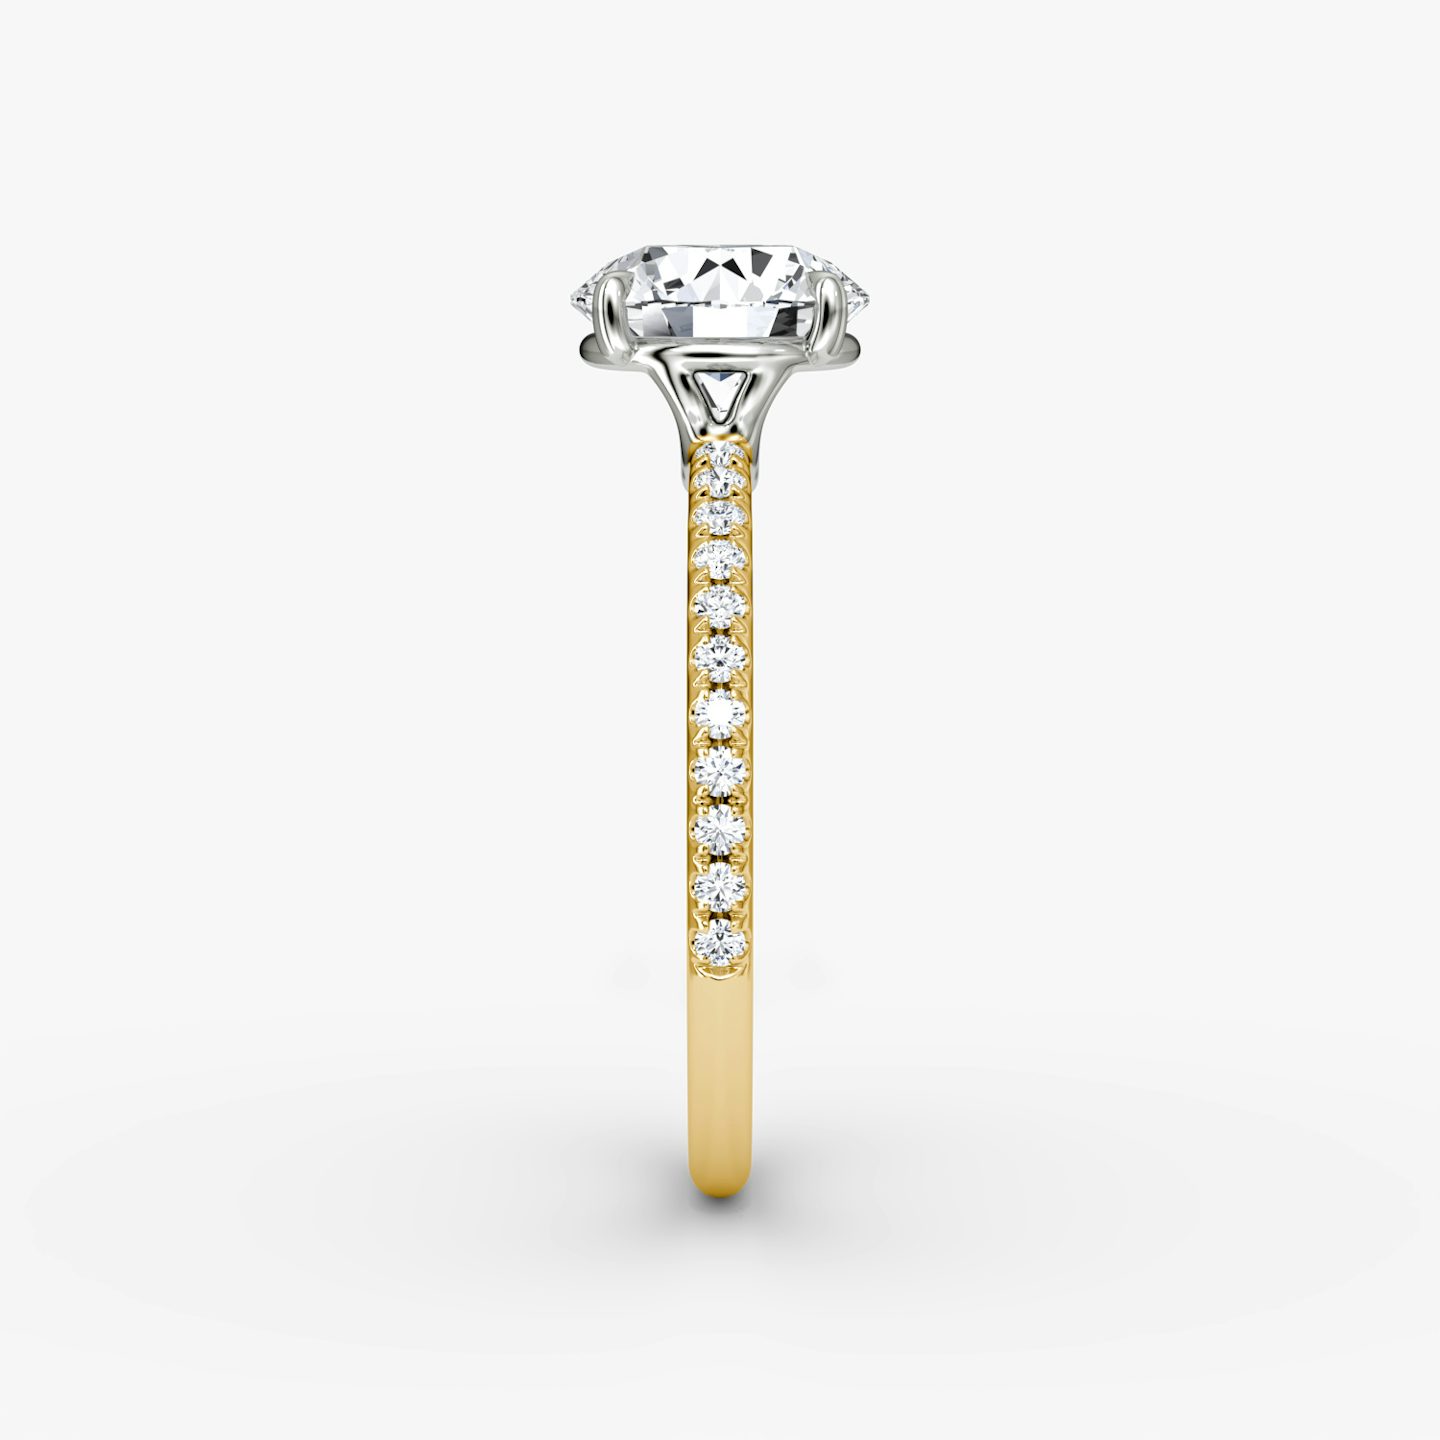 The Signature | Round Brilliant | 18k | 18k Yellow Gold and Platinum | Band: Pavé | Band width: Standard | Carat weight: 1 | Setting style: Plain | Diamond orientation: vertical